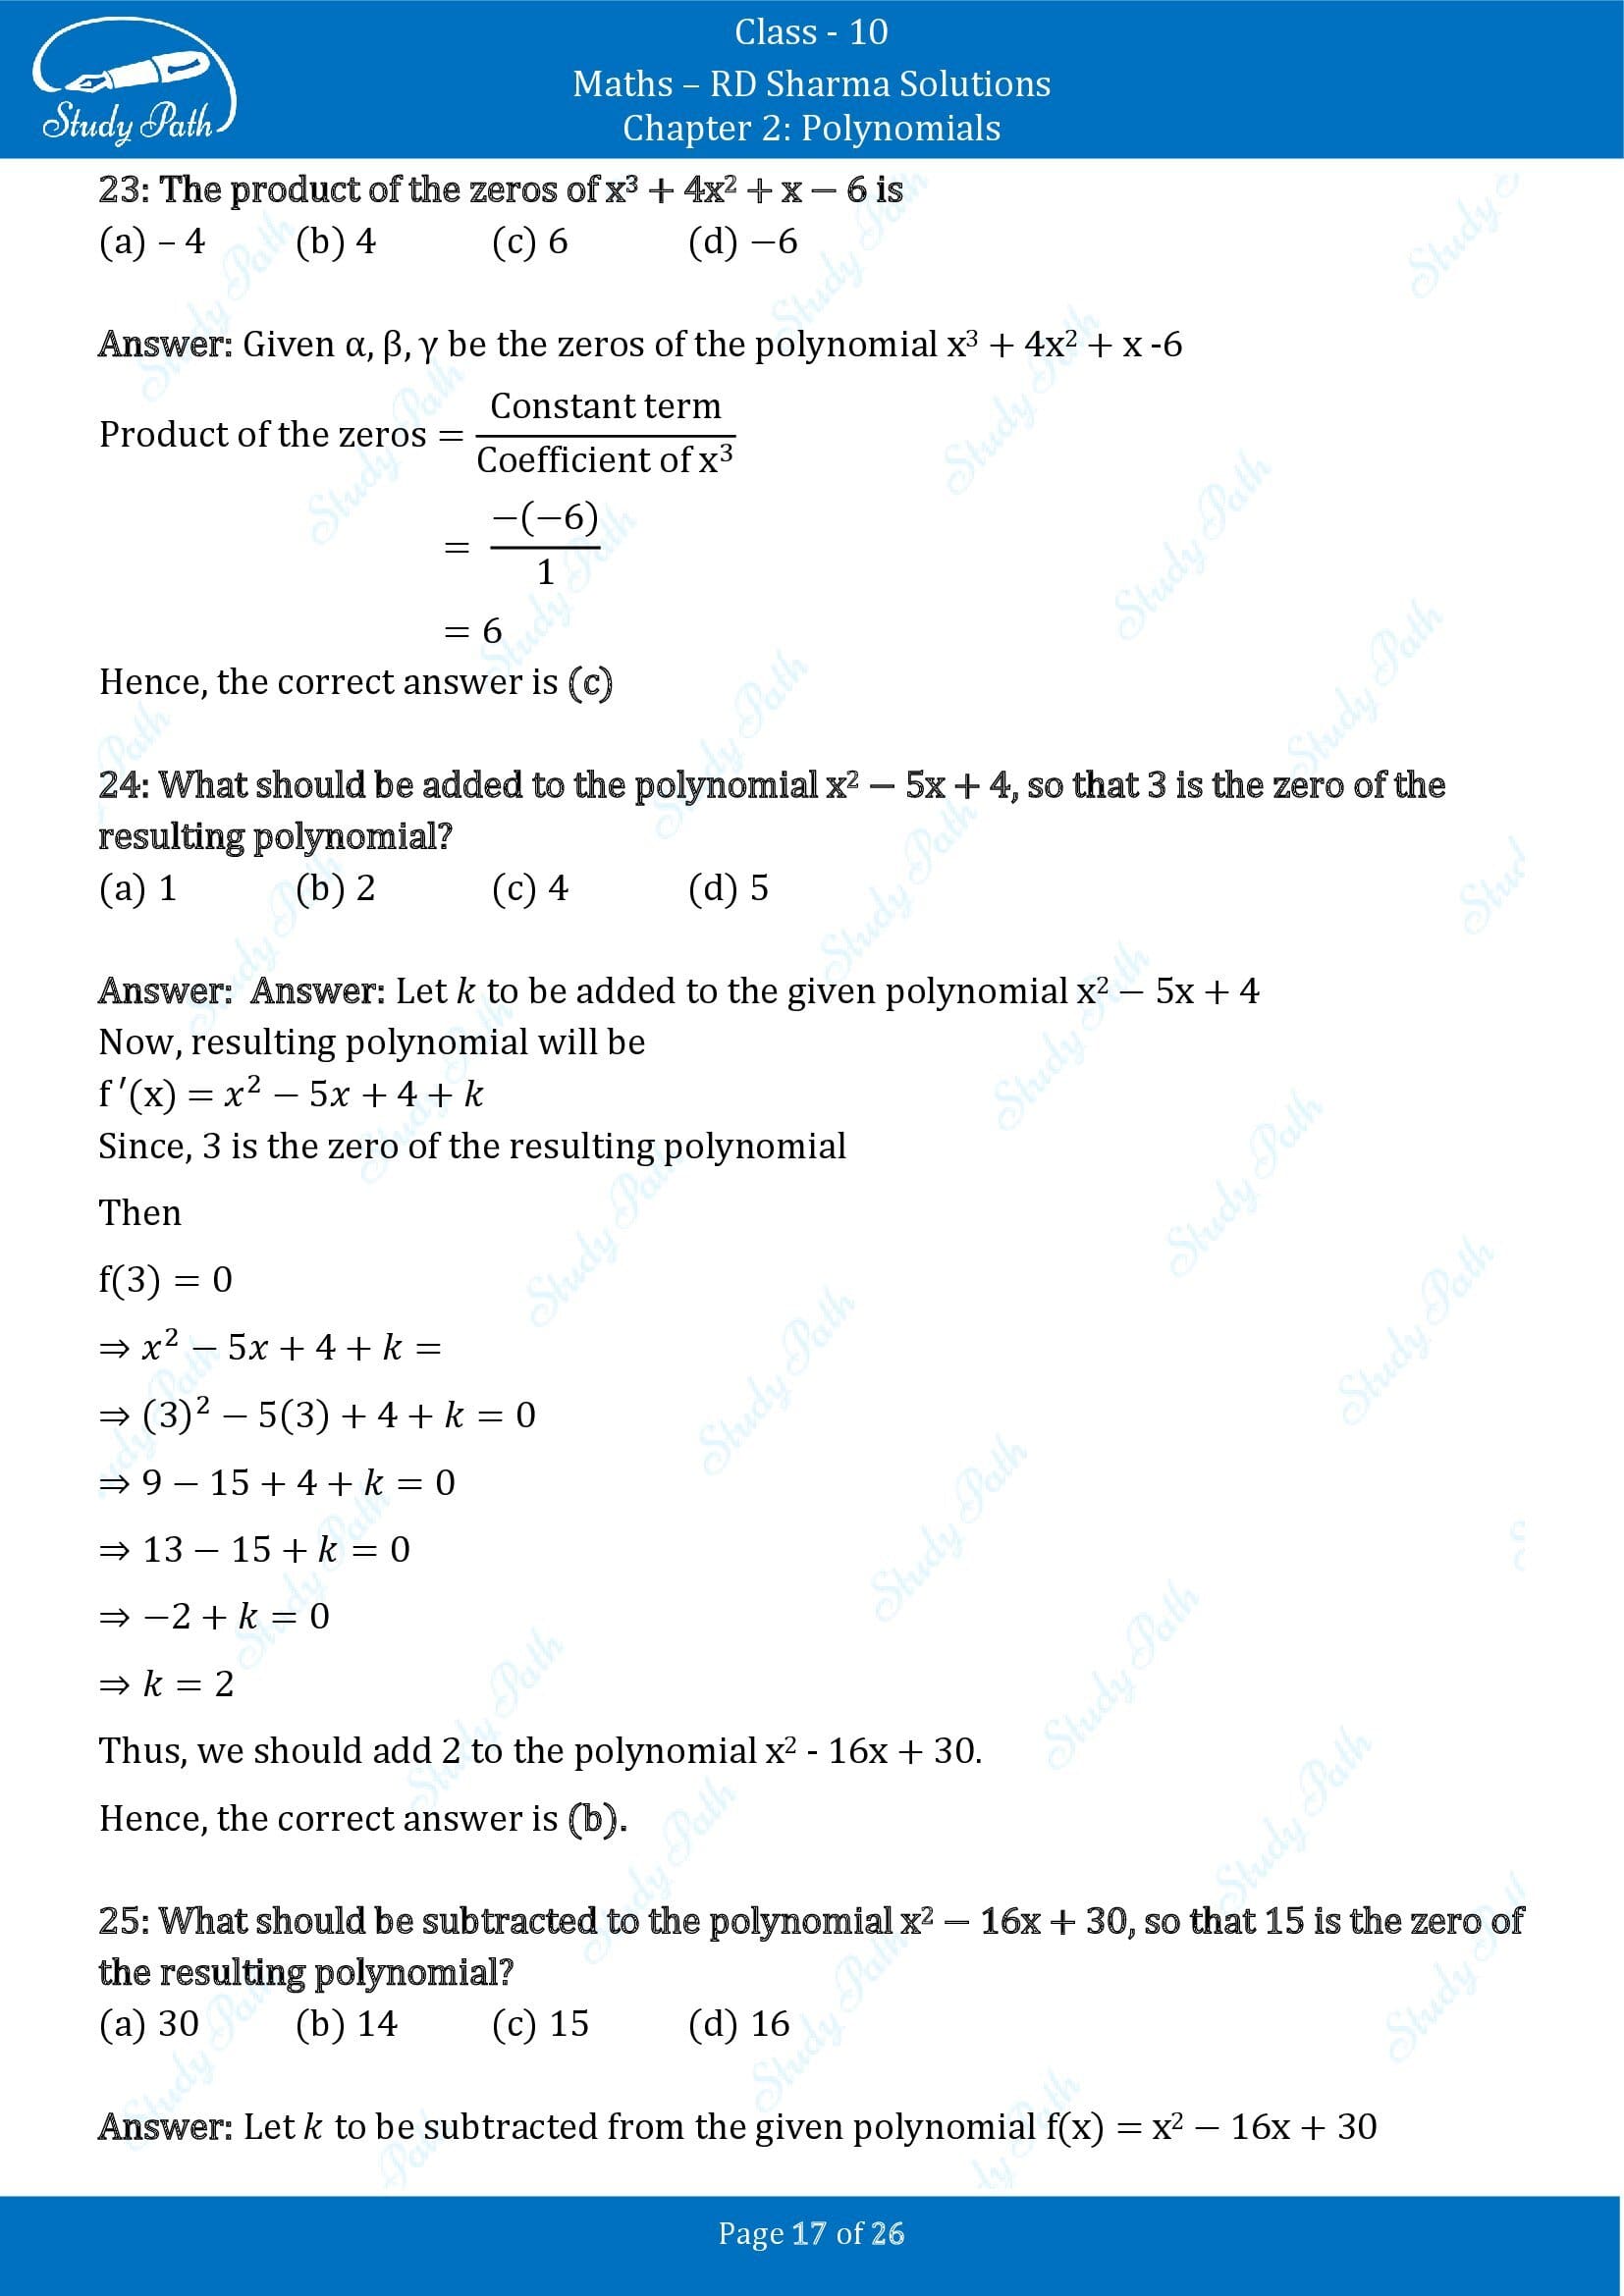 RD Sharma Solutions Class 10 Chapter 2 Polynomials Multiple Choice Questions MCQs 00017